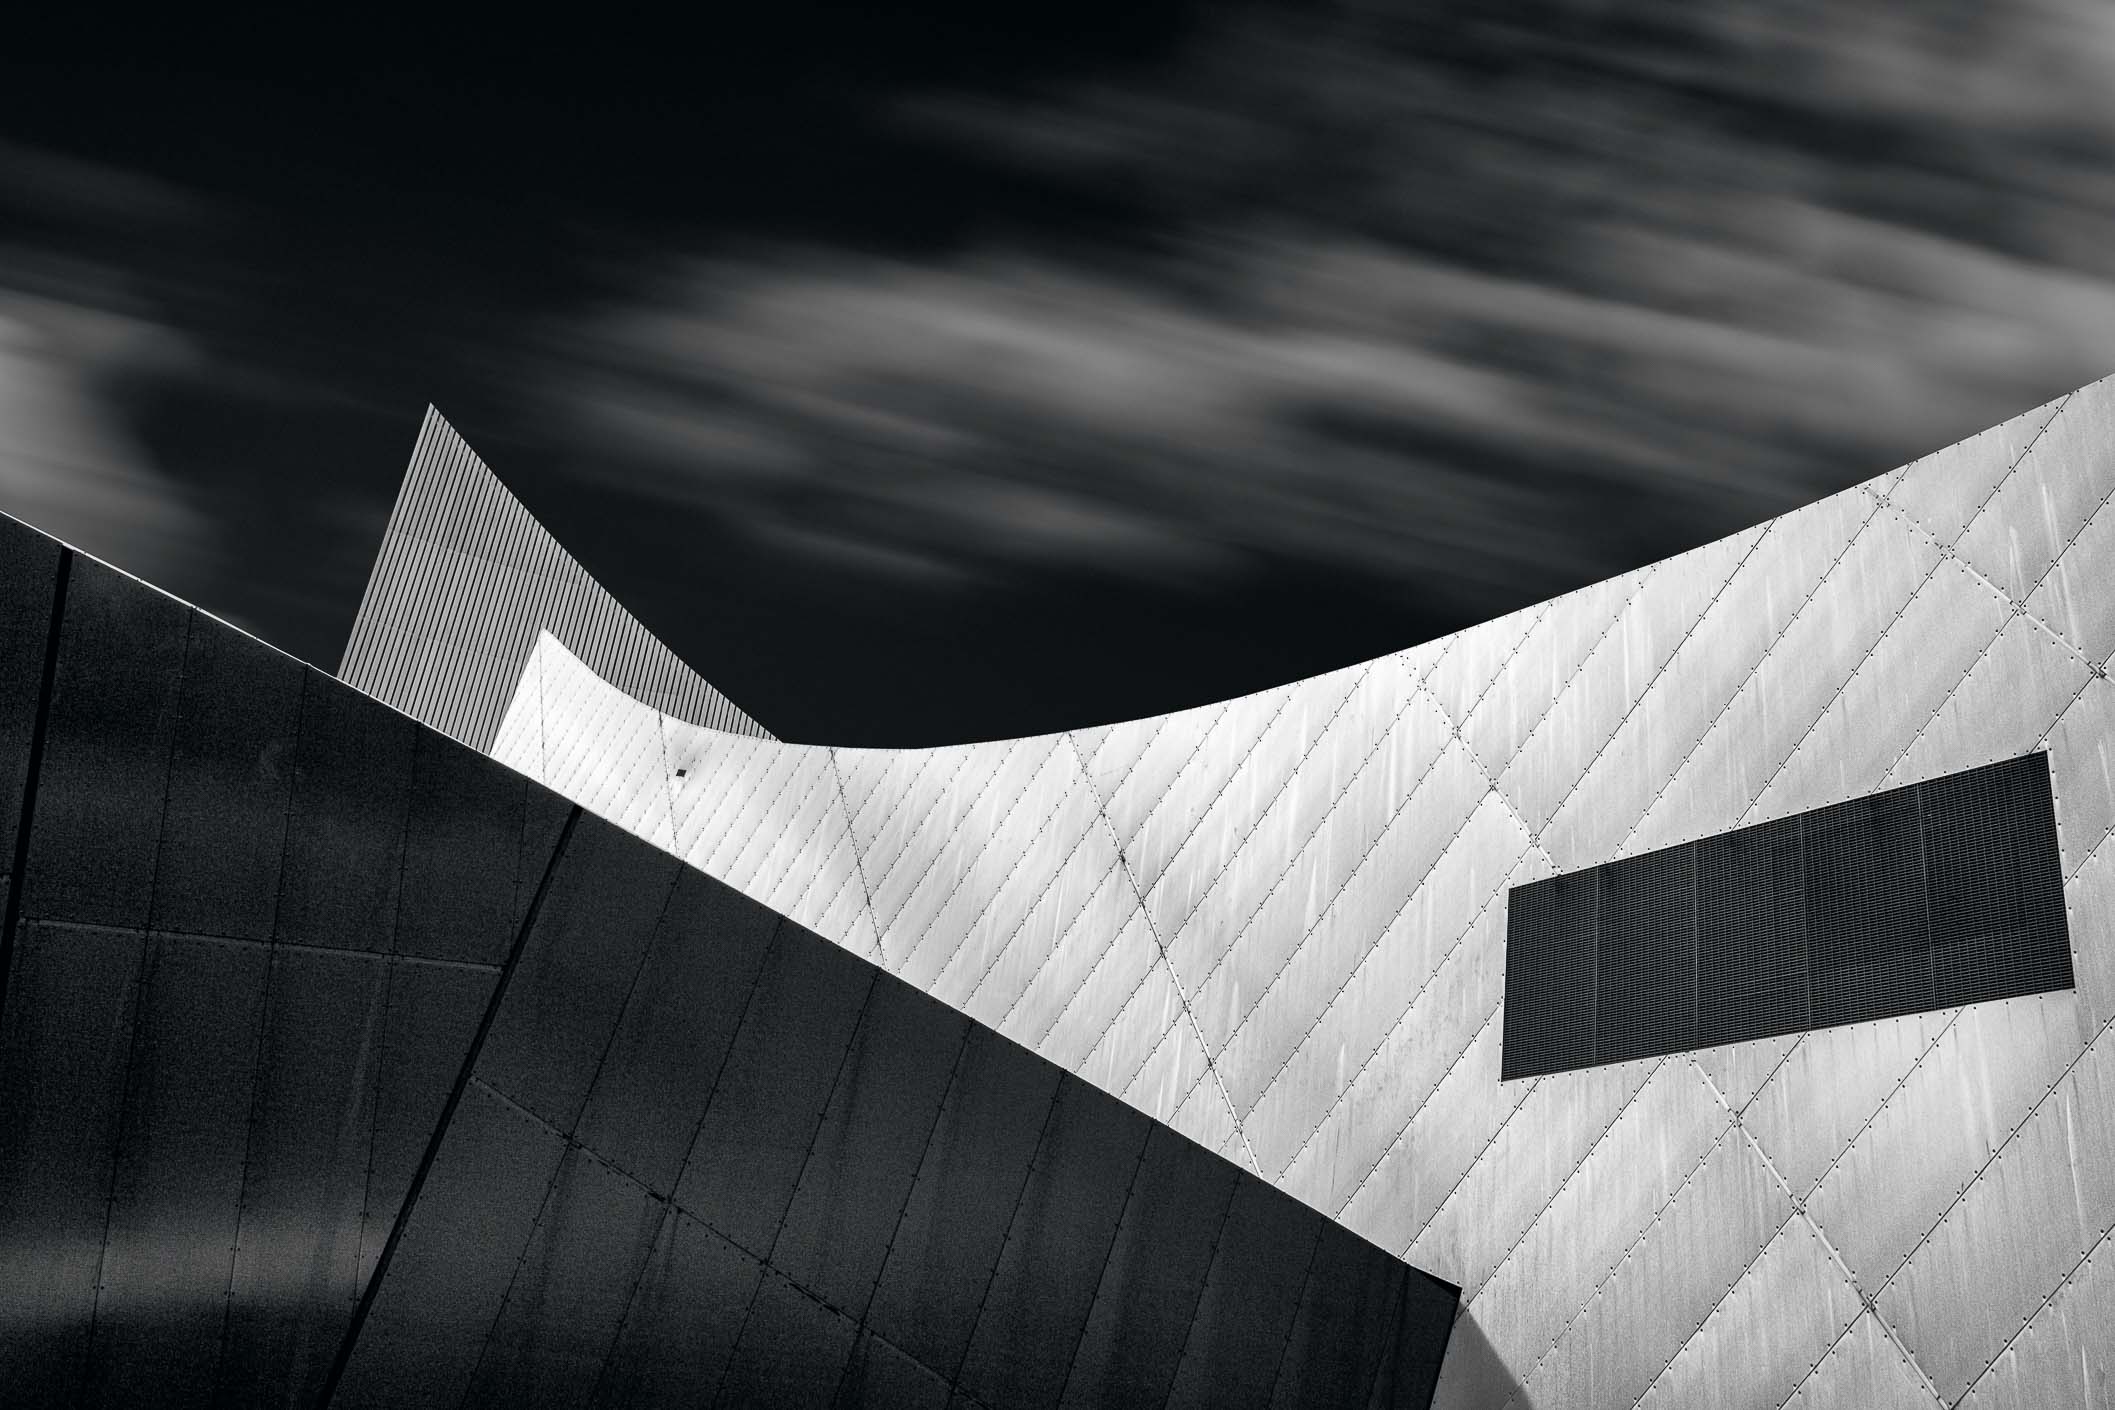 Imperial War Museum, black and white photography, black and white photograph, graphic, monochrome, fine art photography, fine art photographs, architecture, art, gallery, striking, beautiful, style, dramatic, photographic, design, interior design 